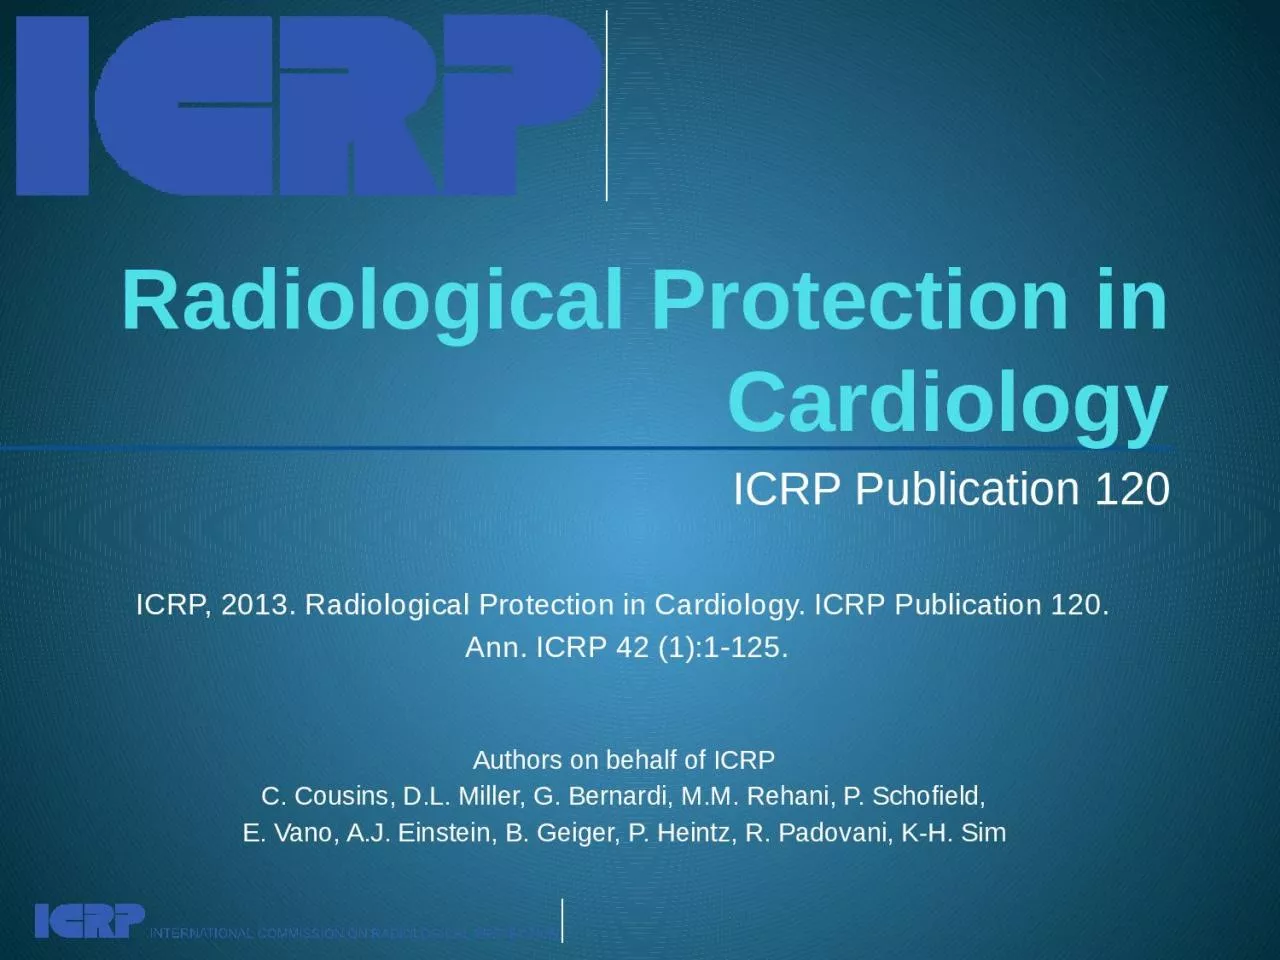 Radiological Protection in Cardiology